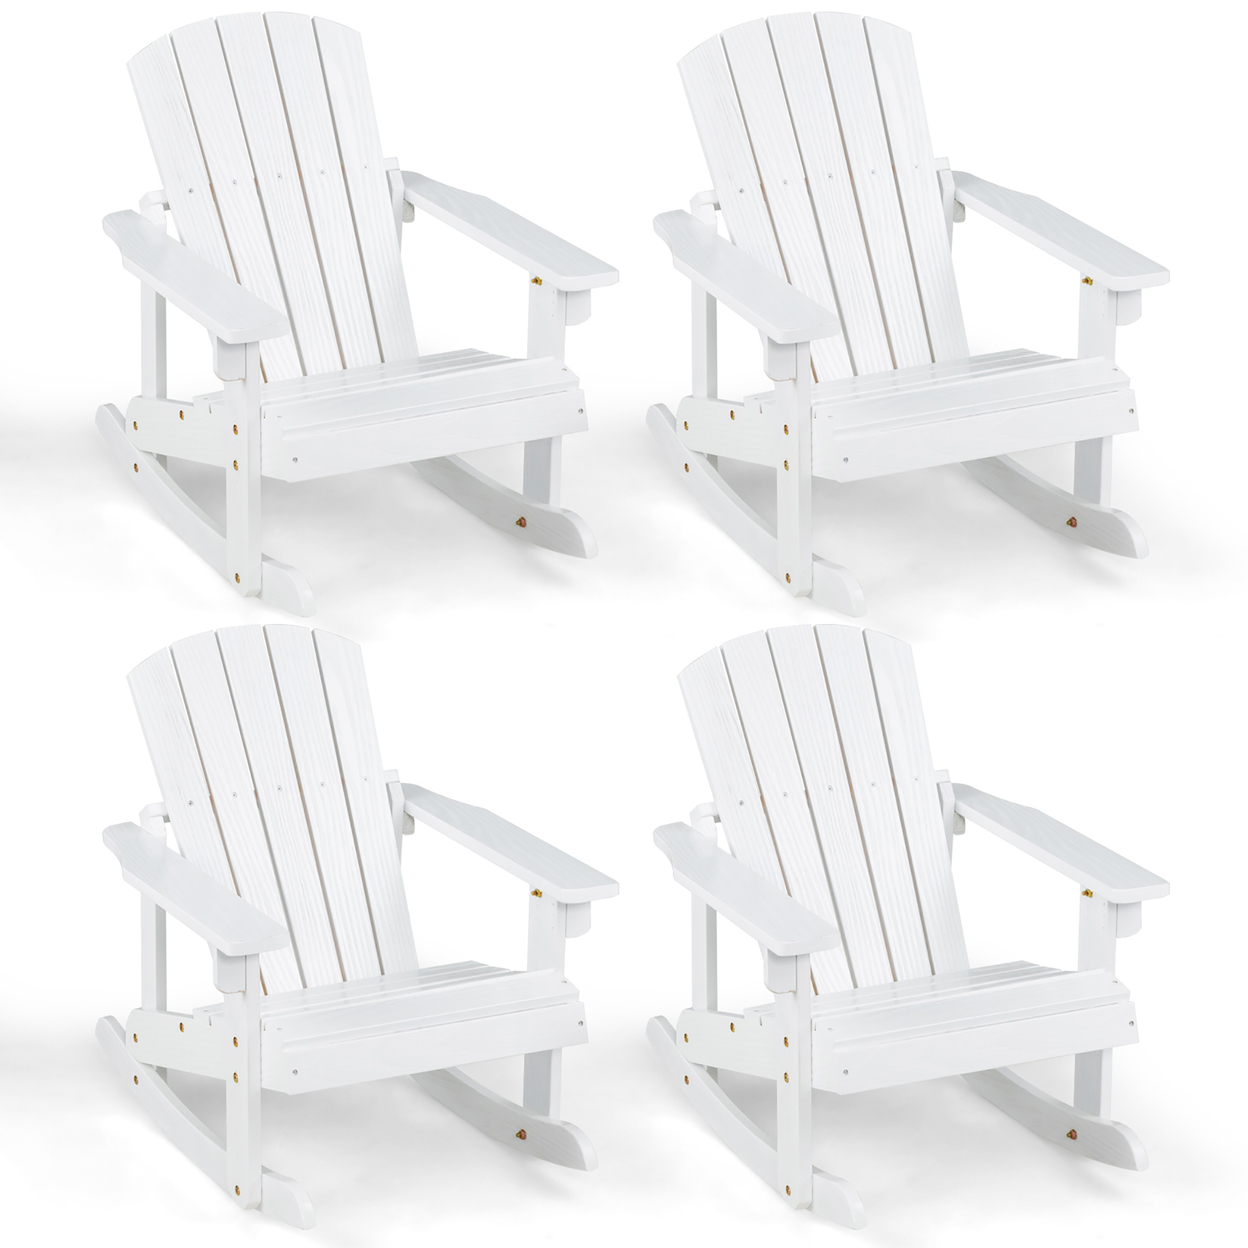 4PCS Kid Adirondack Rocking Chair Outdoor Solid Wood Slatted Seat Backrest - White